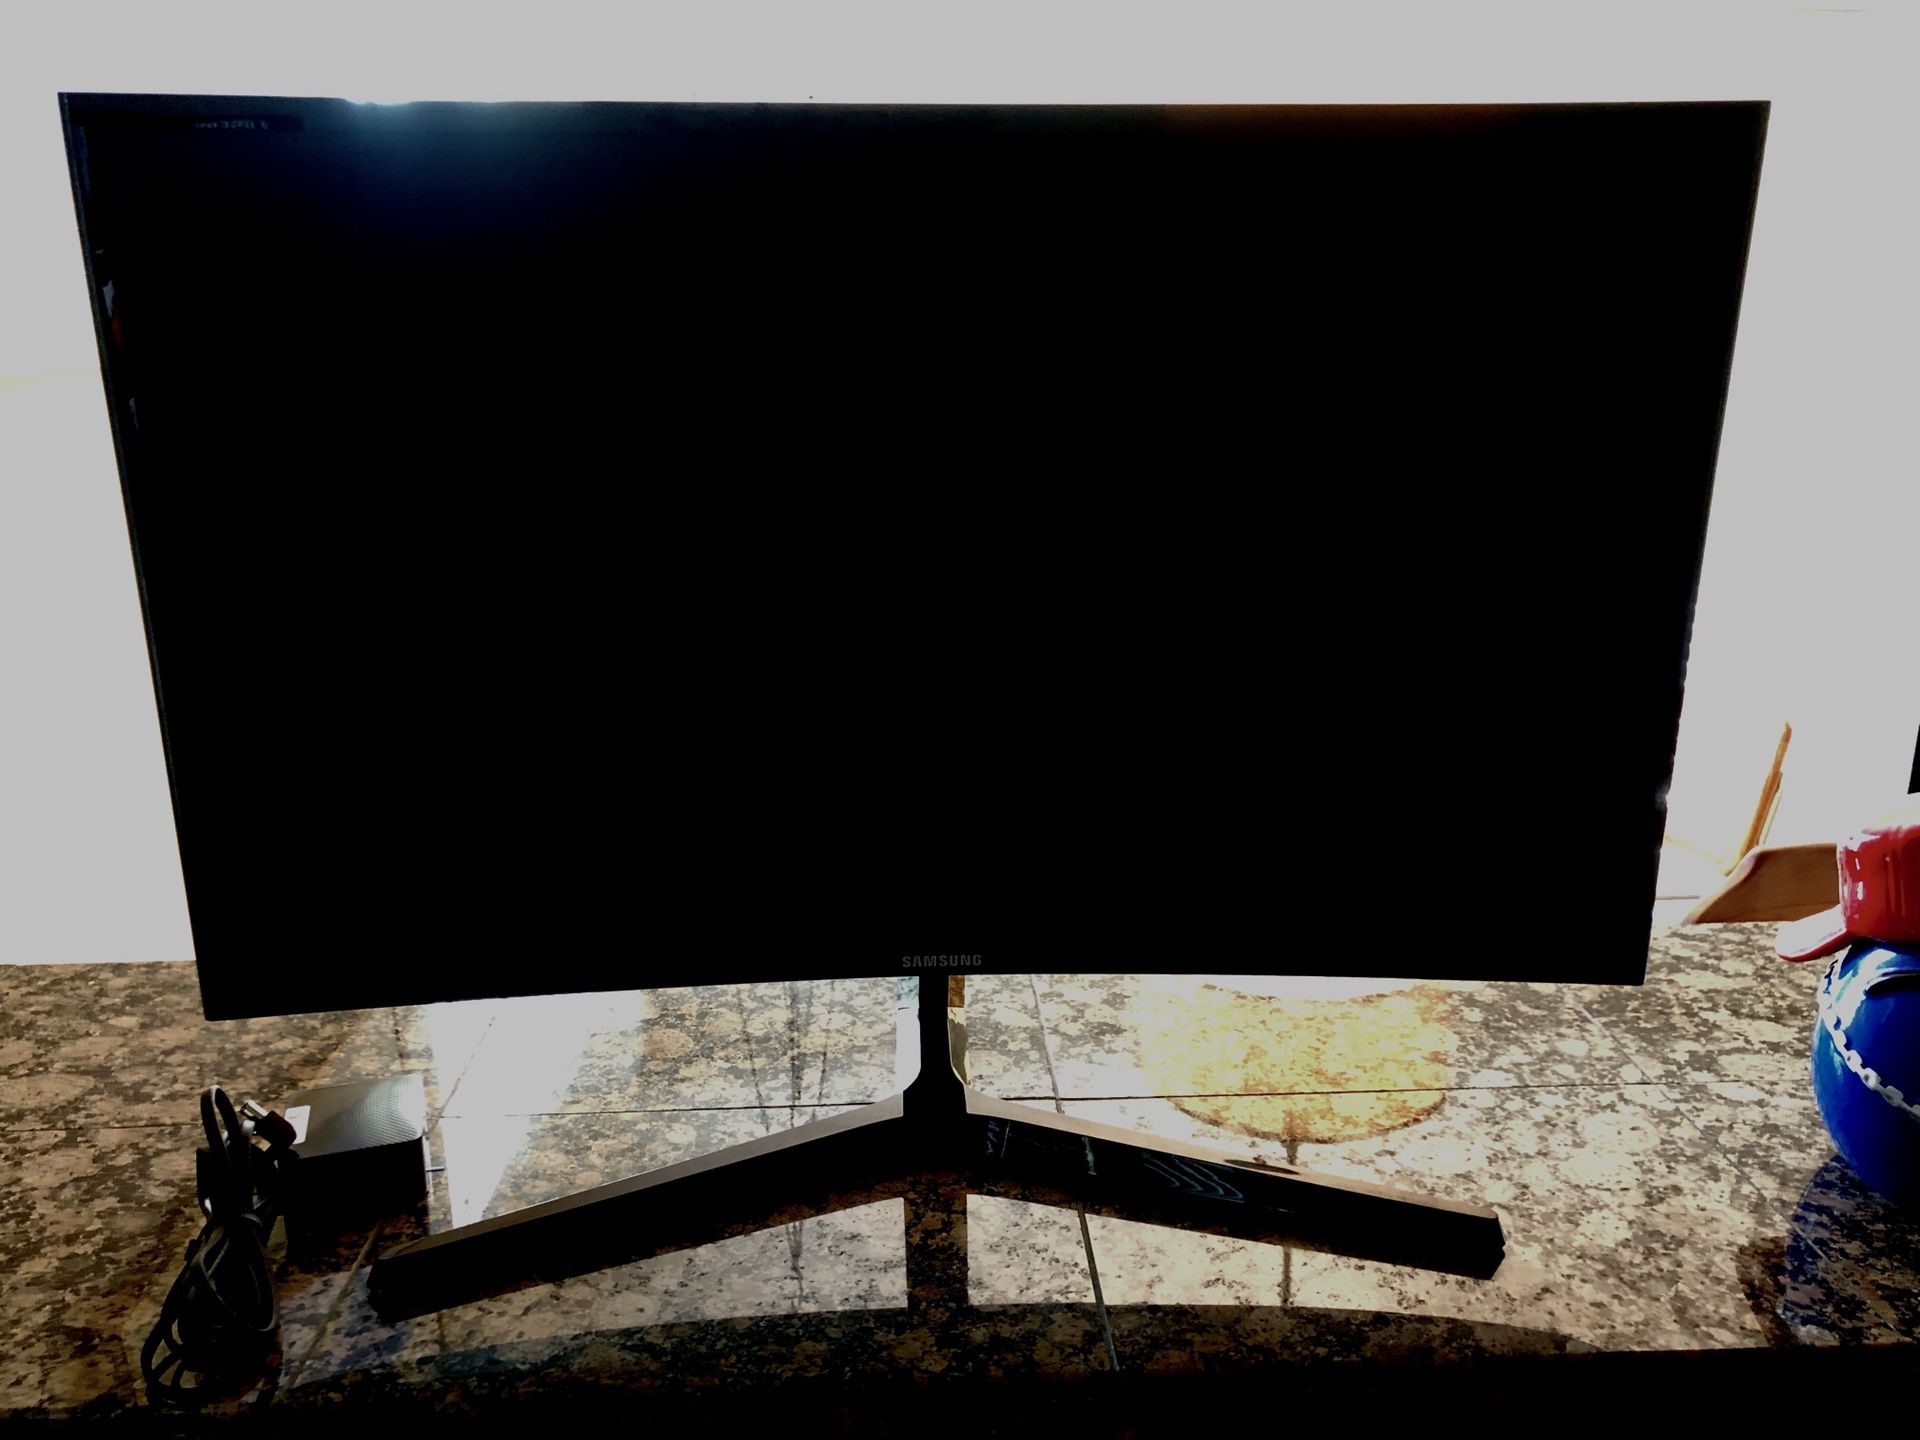 Samsung curved monitor "27